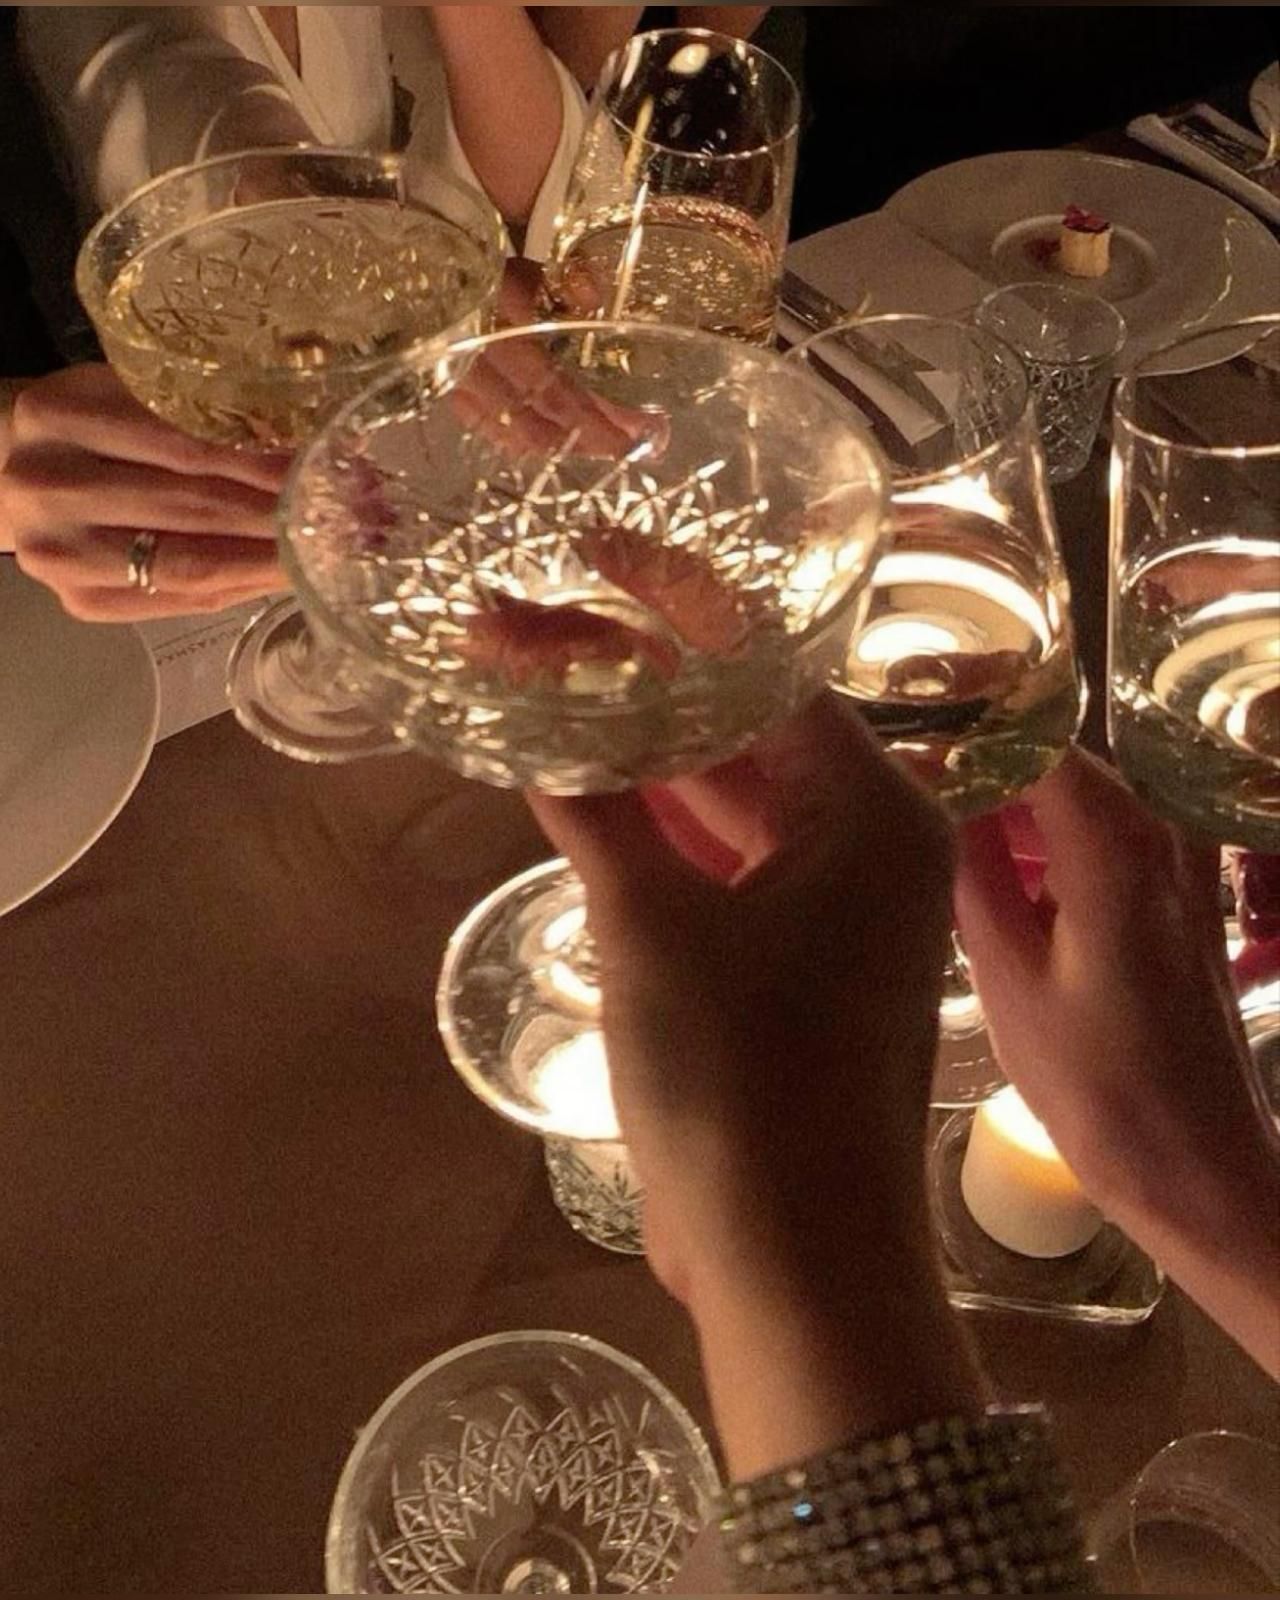 People holding up glasses of champagne at a table. - Champagne